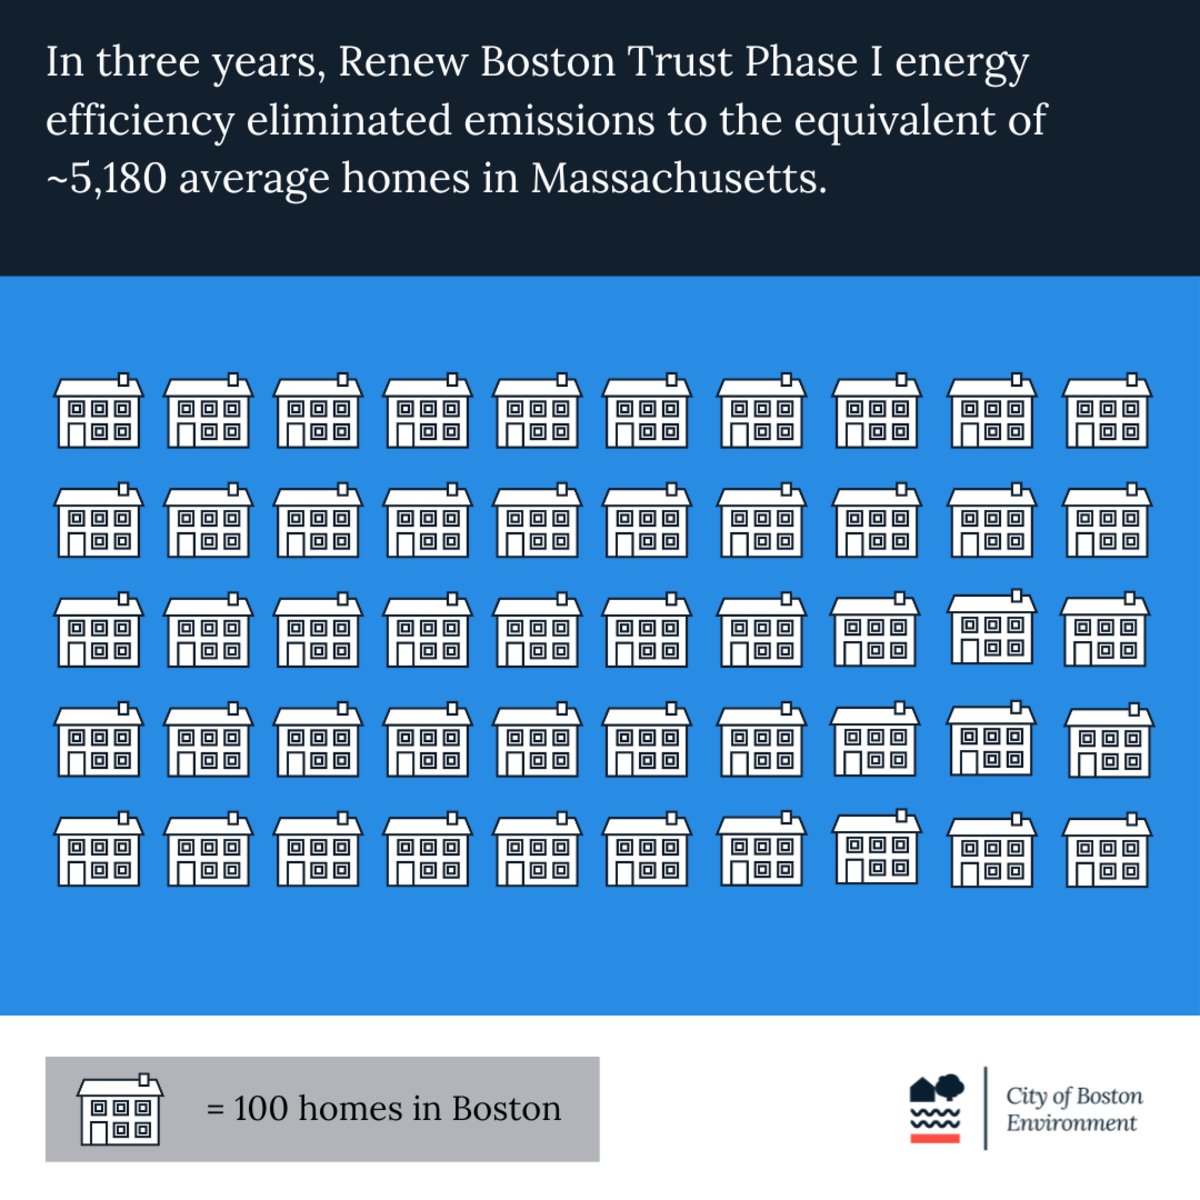 Building-equivalent emission savings for Phase 1